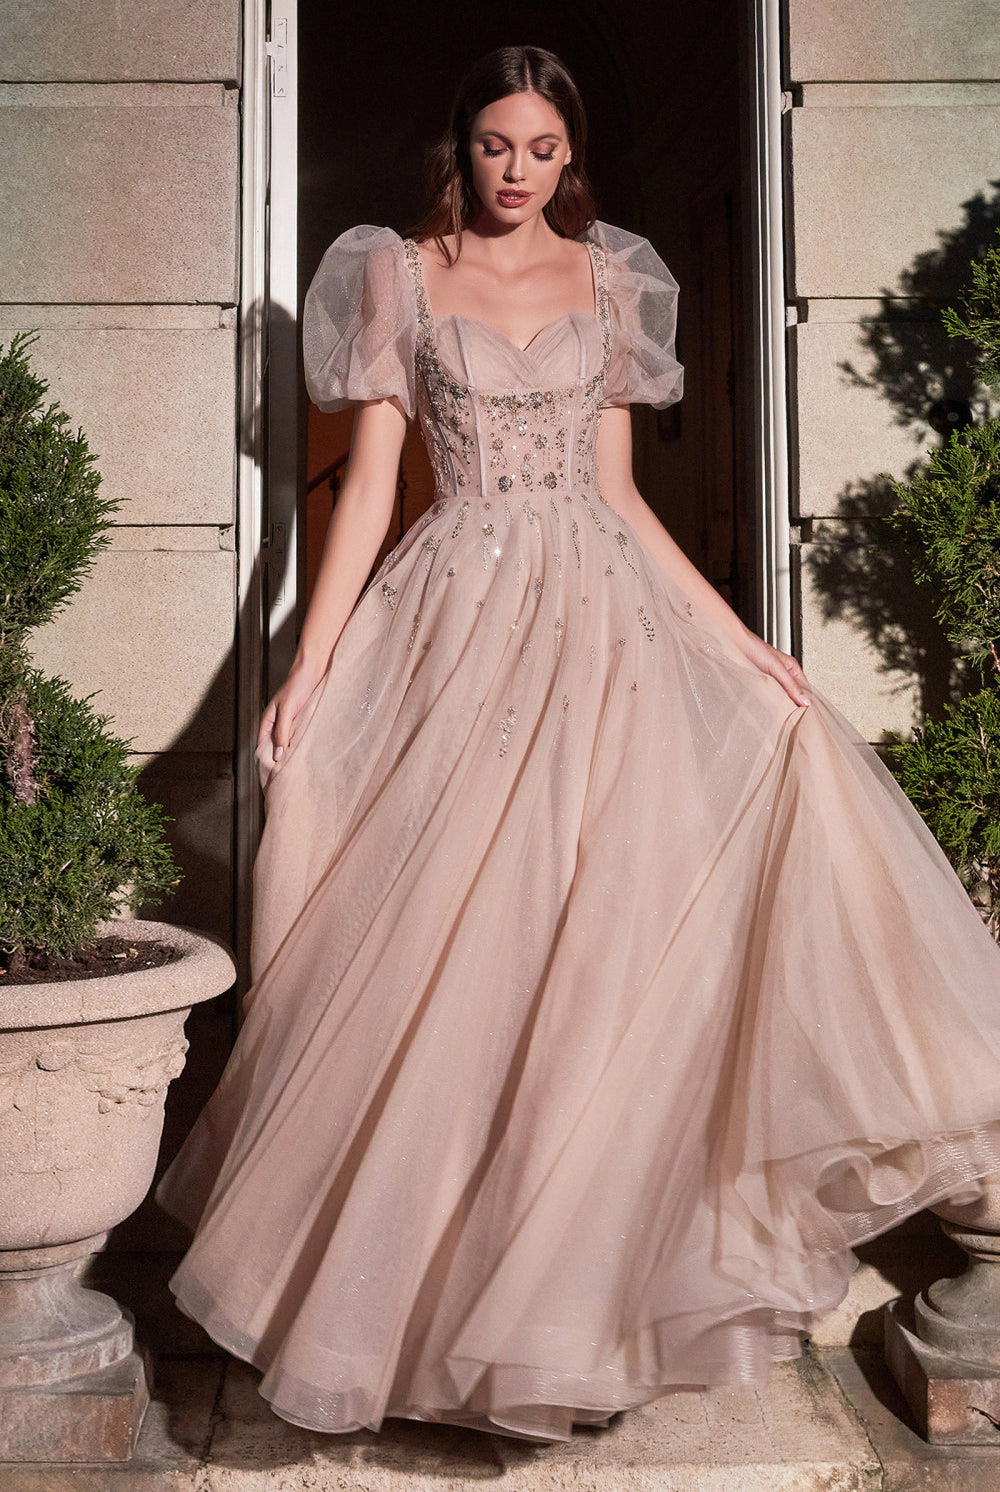 Retro Princess Gown Laced Bodice Tulle Skirt-smcdress